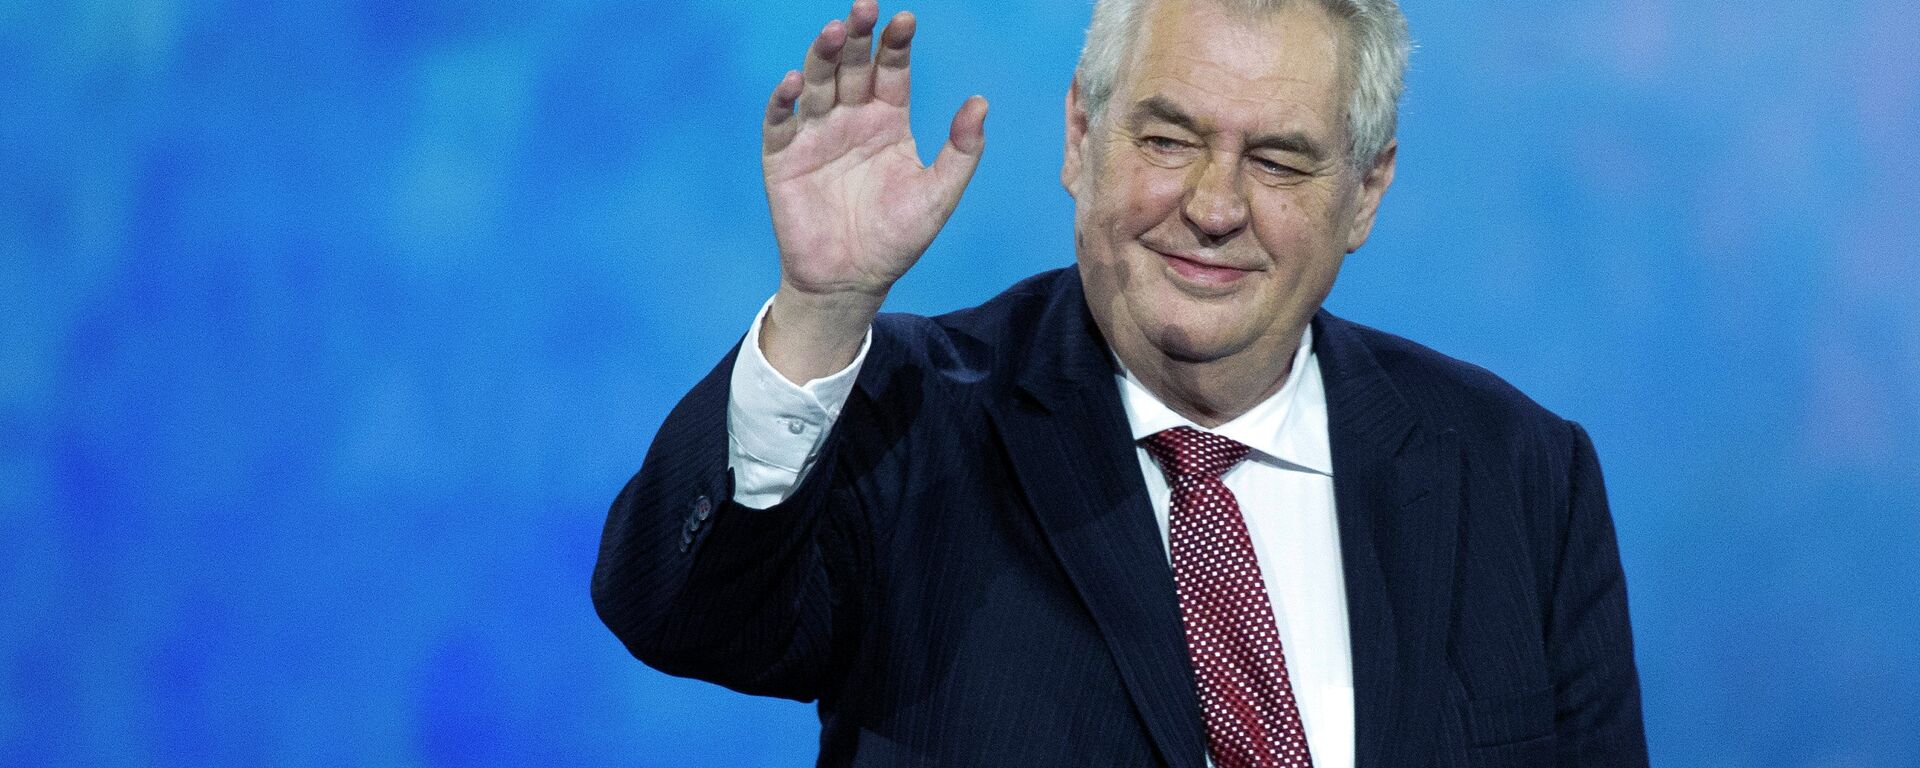 Czech Republic President Milos Zeman waves to the audience after speaking at the 2015 American Israel Public Affairs Committee  - Sputnik International, 1920, 05.11.2021